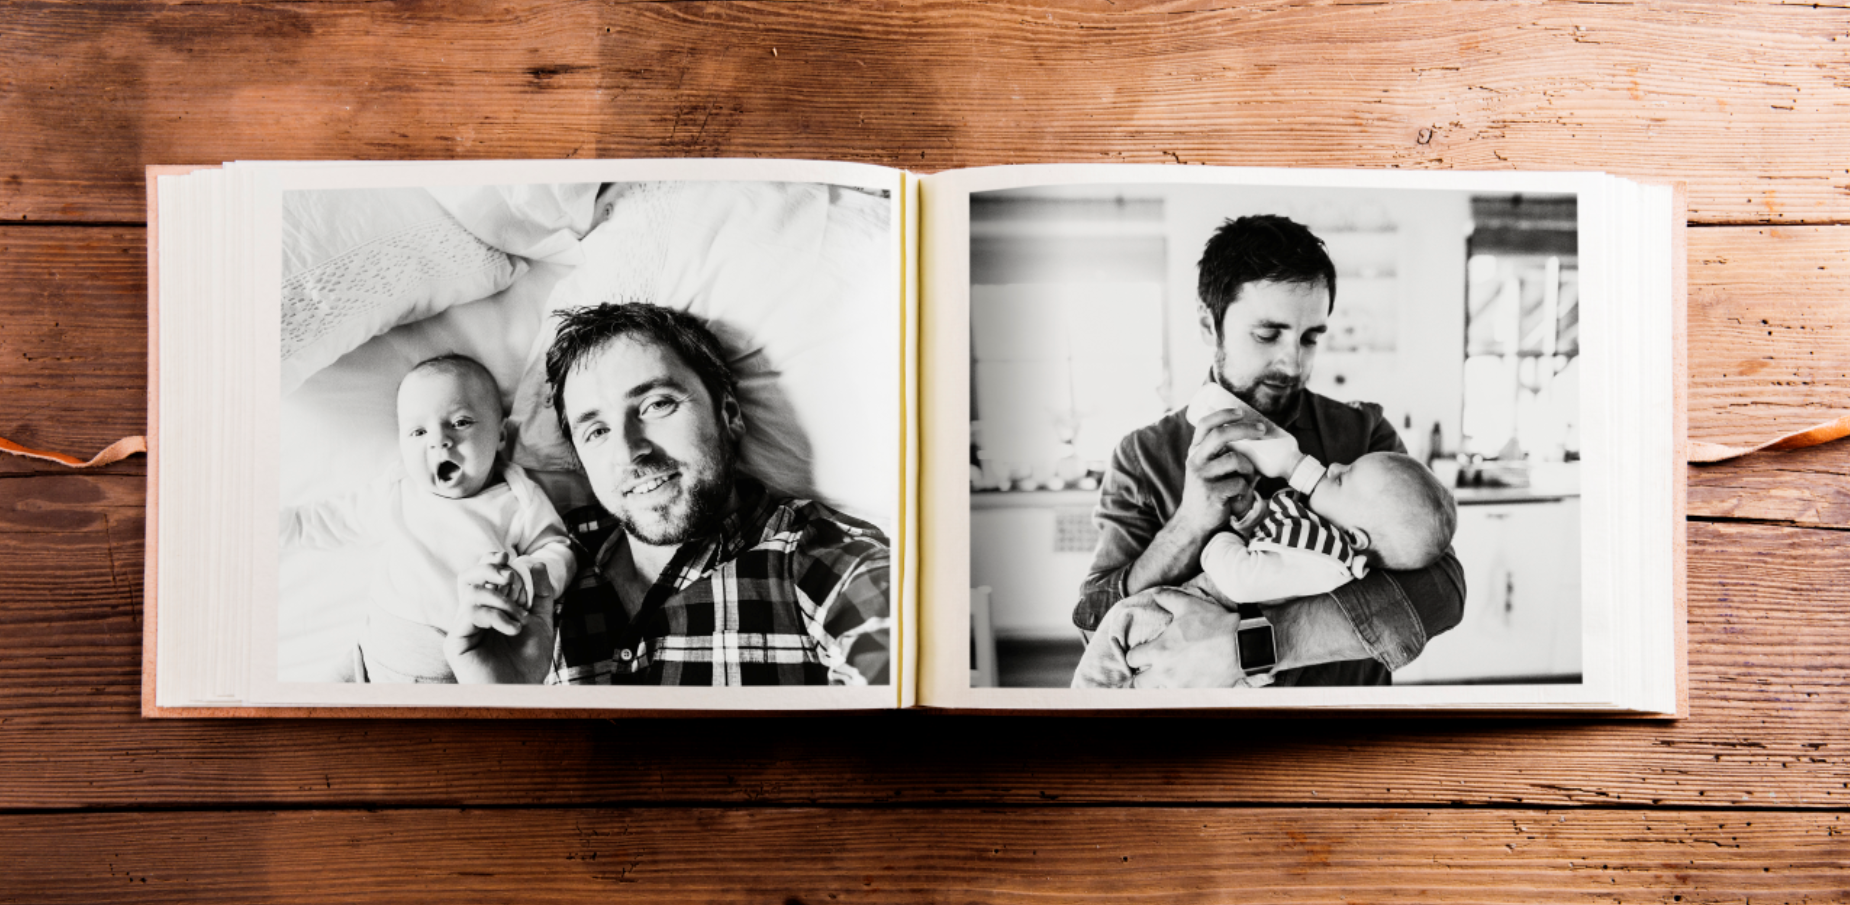 The Best Way to Make Your Own Photobook - DVD Your Memories